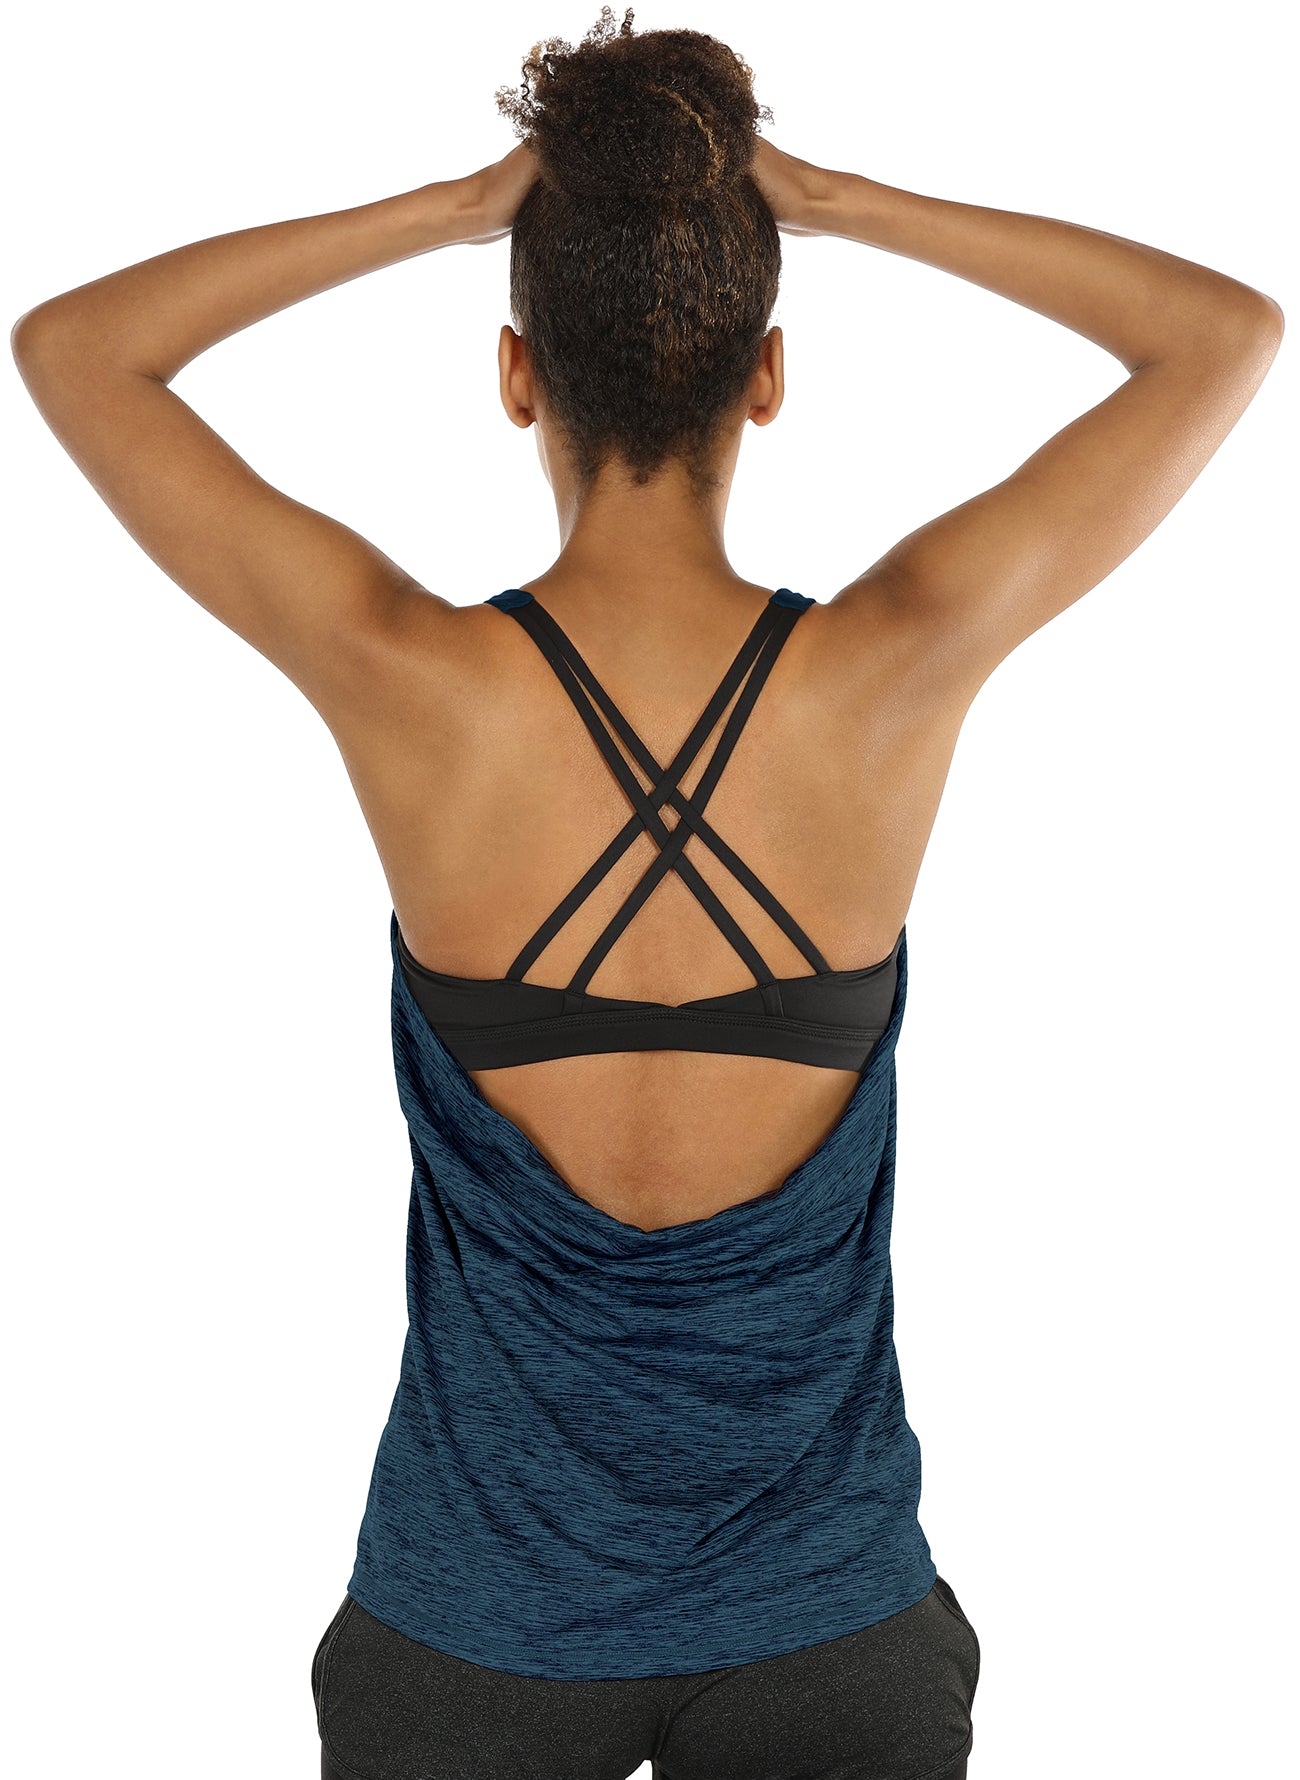 icyzone Workout Tank Tops Built in Bra - Women's India